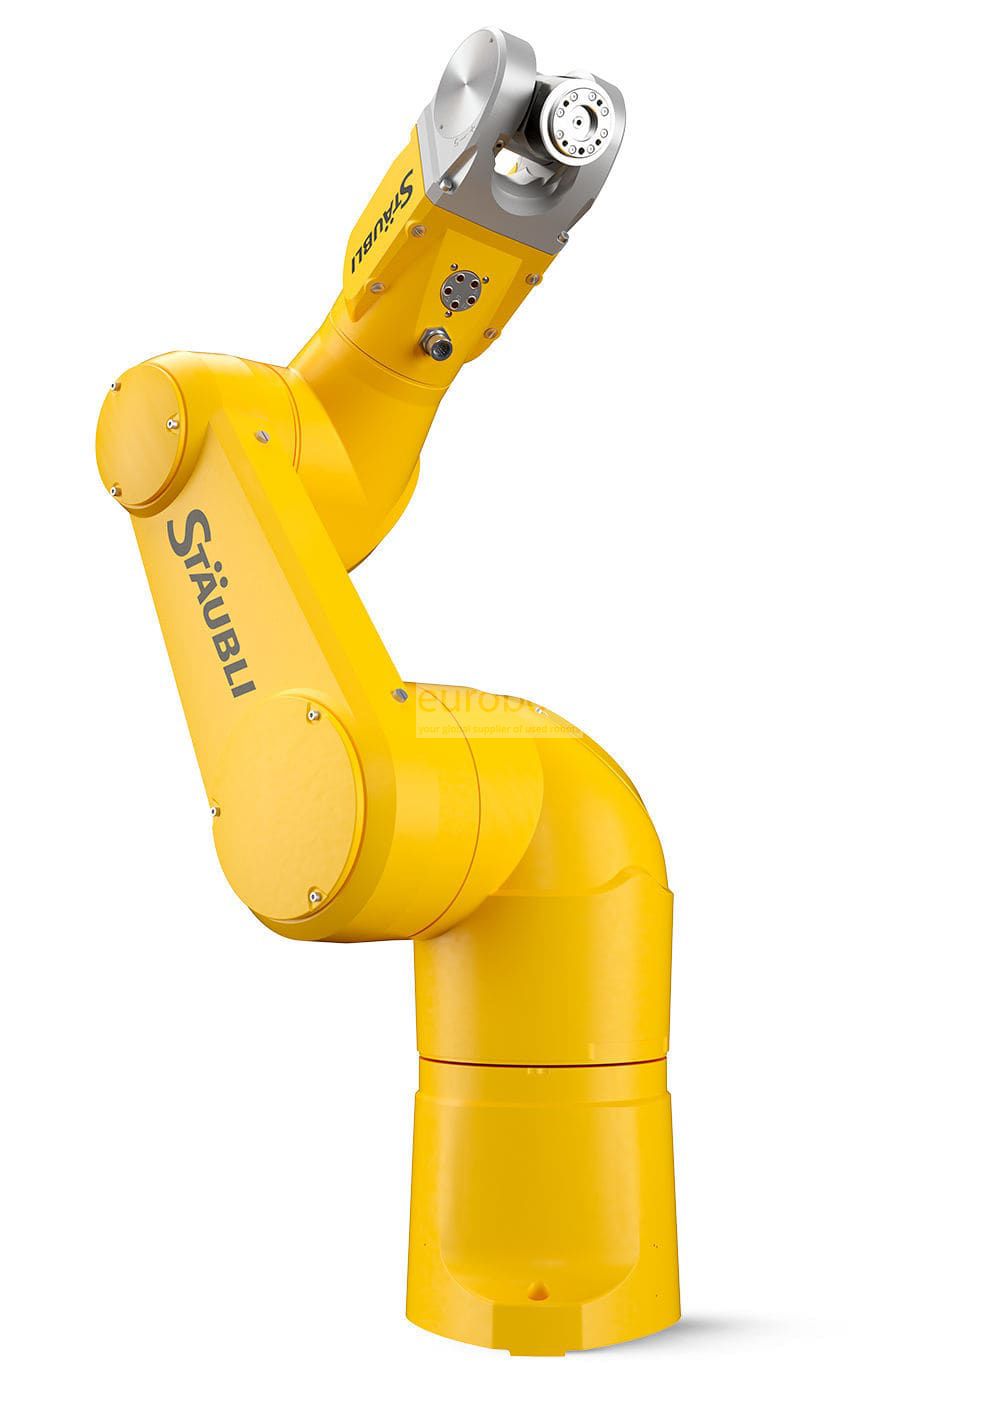 Other Robots Staubli TX90L  with CS8C controller